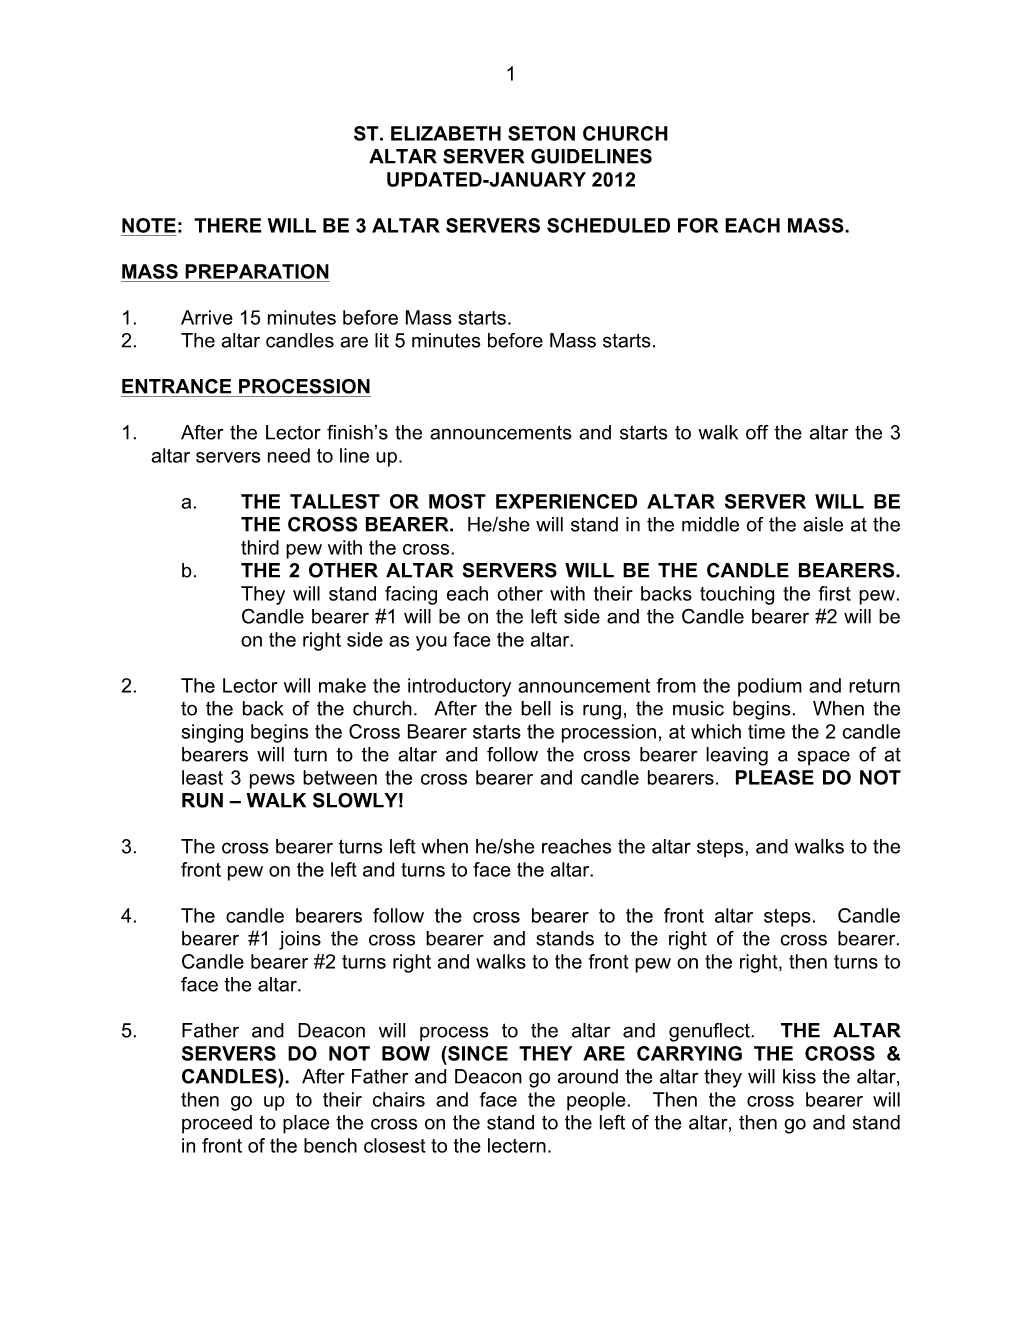 Altar Server Guidelines Updated-January 2012